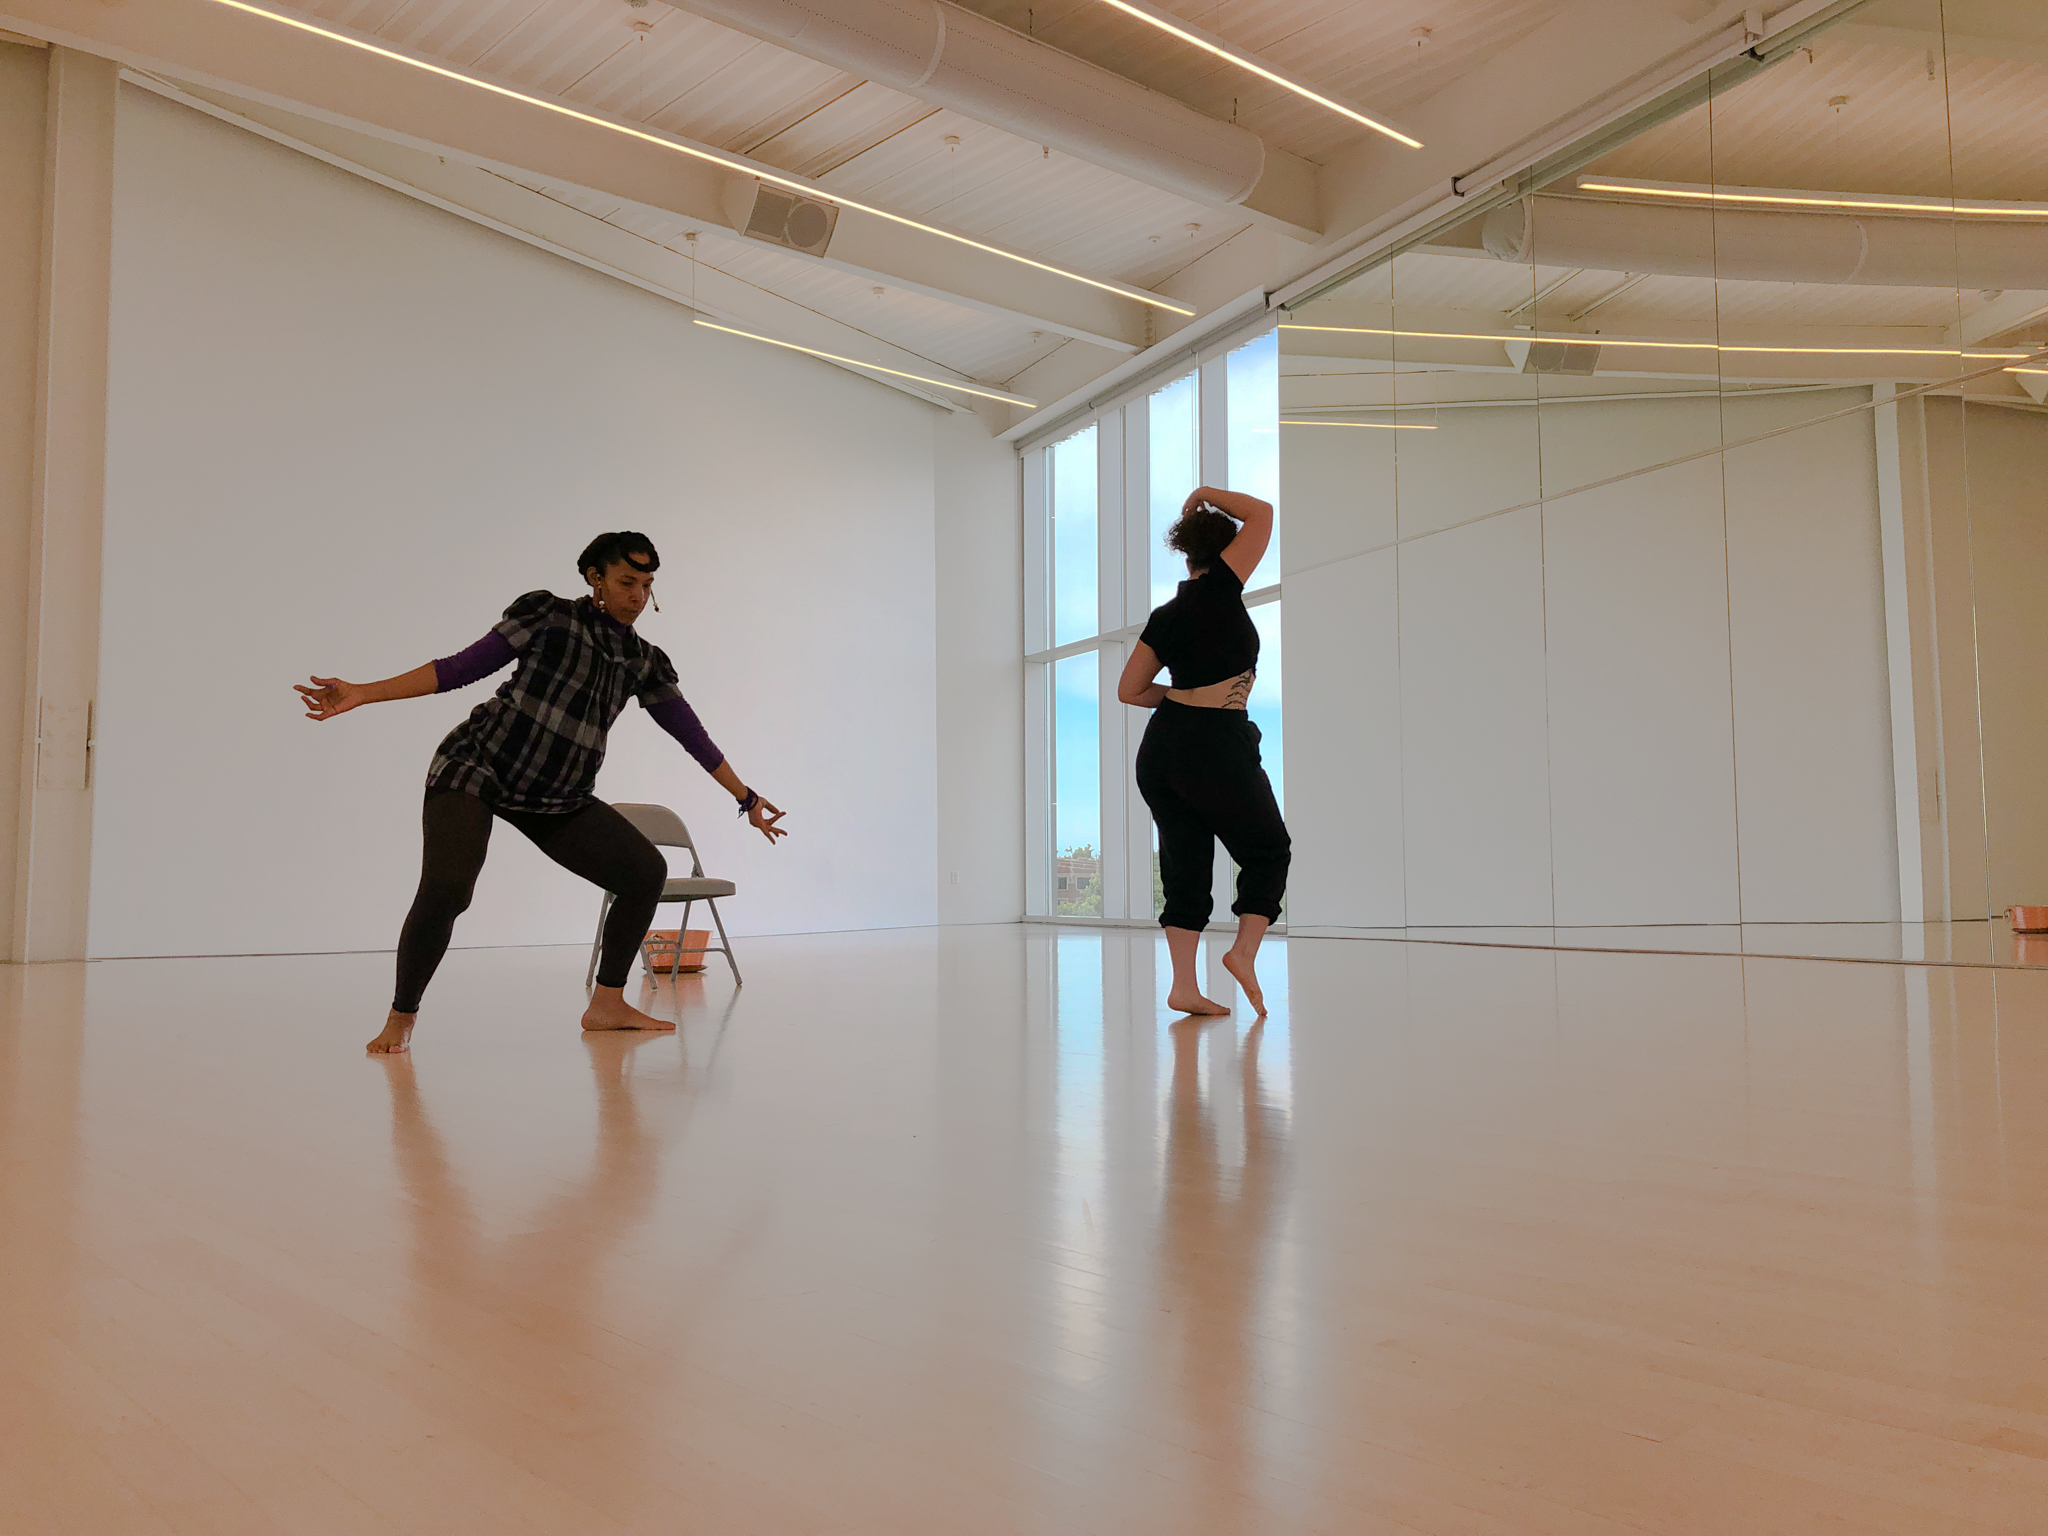 Two dancers are in are in the middle of the rehearsal space, with mirrors and windows on either side. One dancer has her legs spread wide and bent, arms widespread as well. The other is facing away, arms above her head, mid-movement.